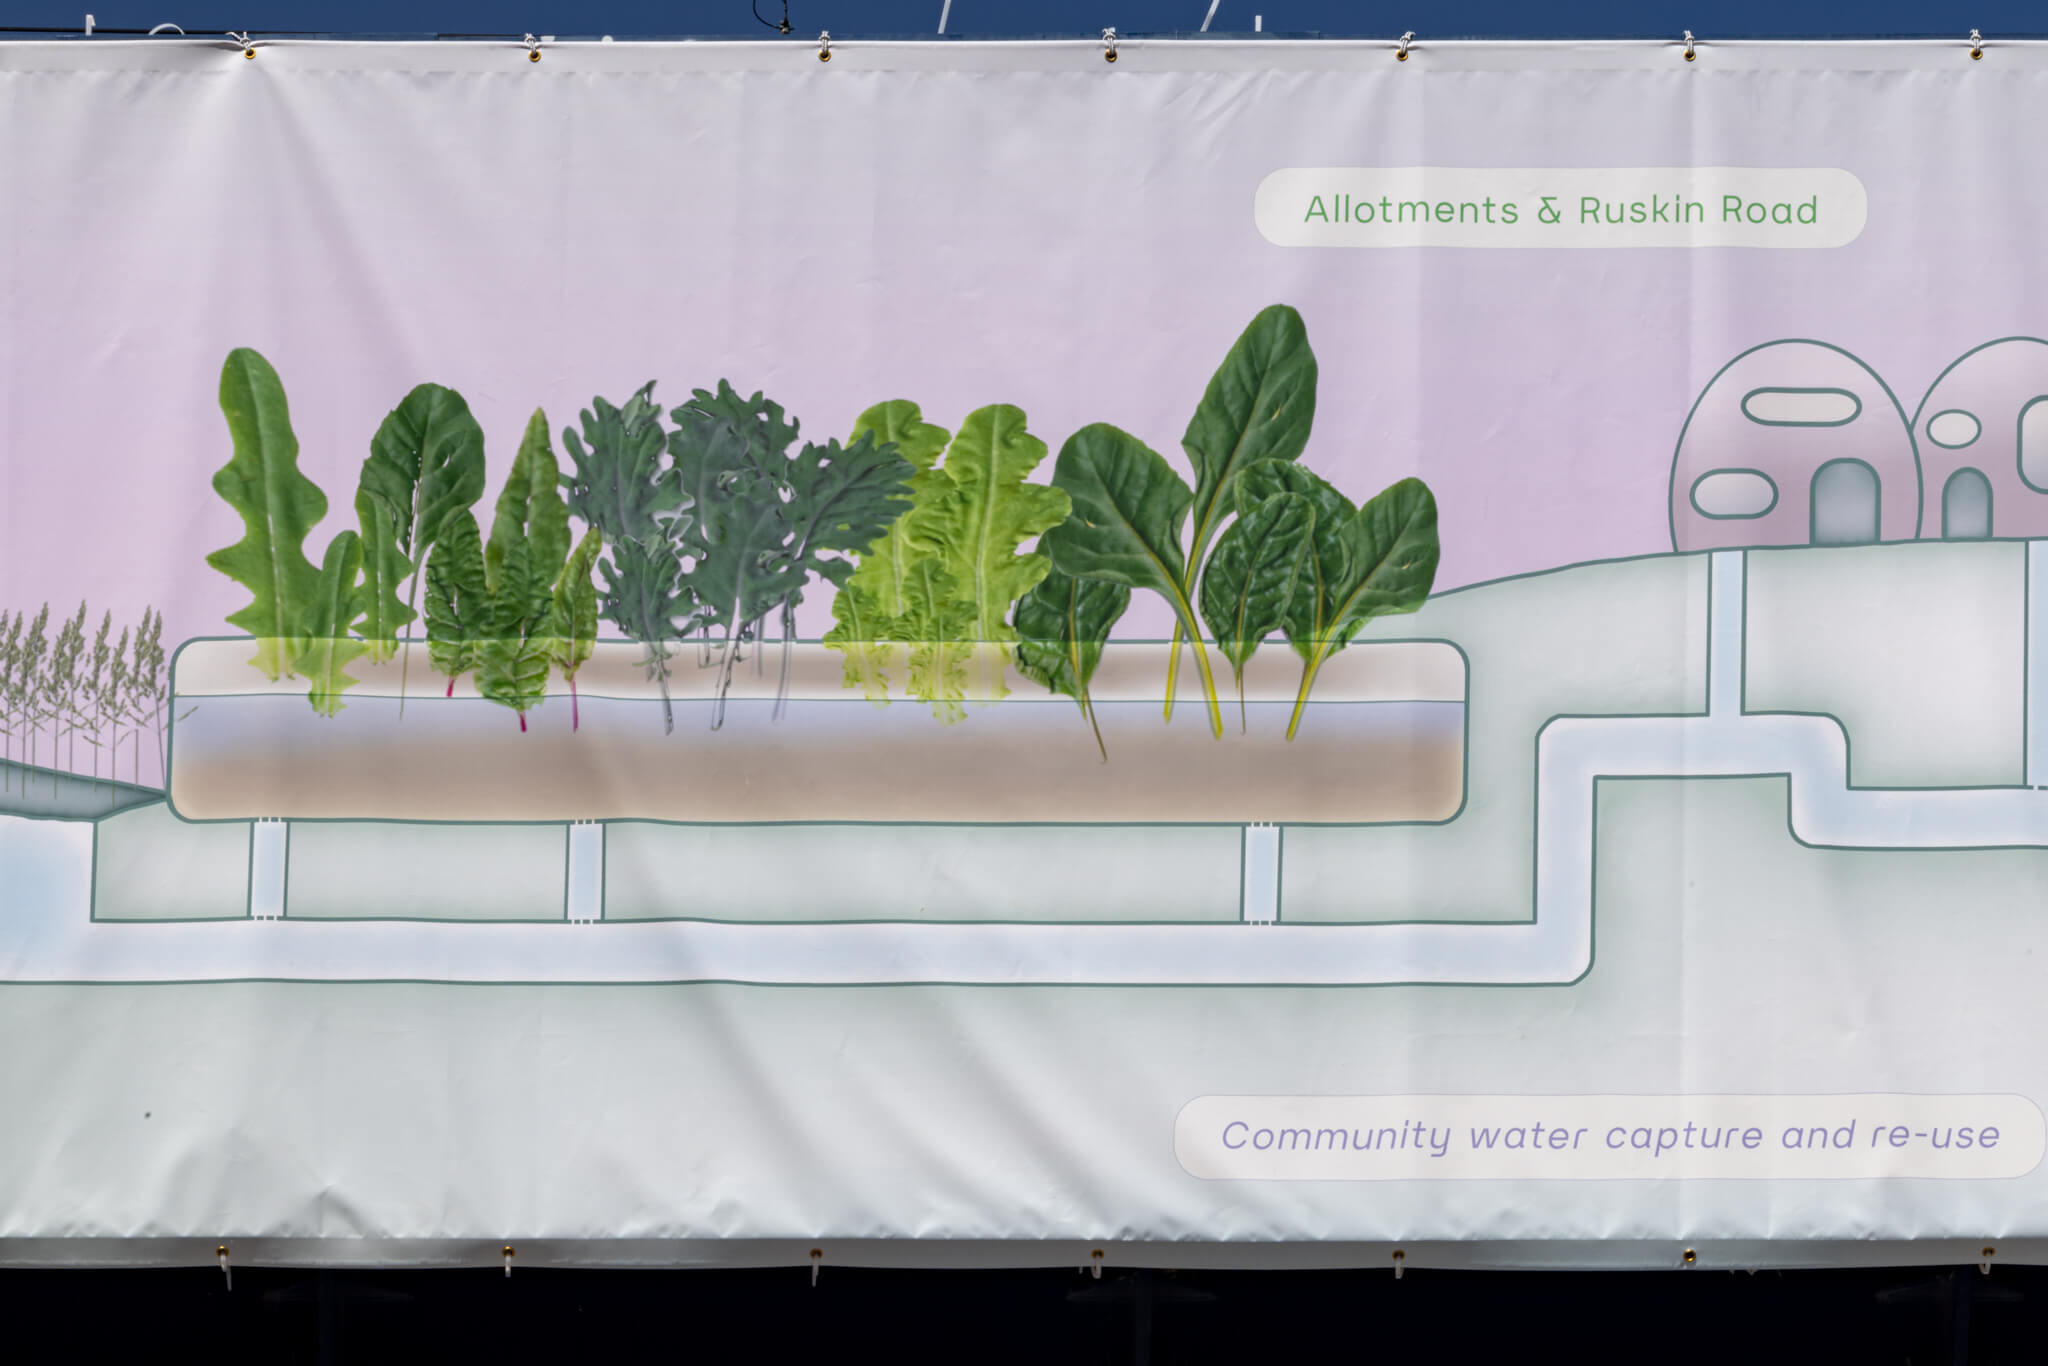 a pastel green and pink close up of one of the banners showing scanned salad leaves growing on an allotment and illustrated irrigation pipes. words in boxes read 'Allotments and Ruskin Road' and 'Community Water Capture and re-use'